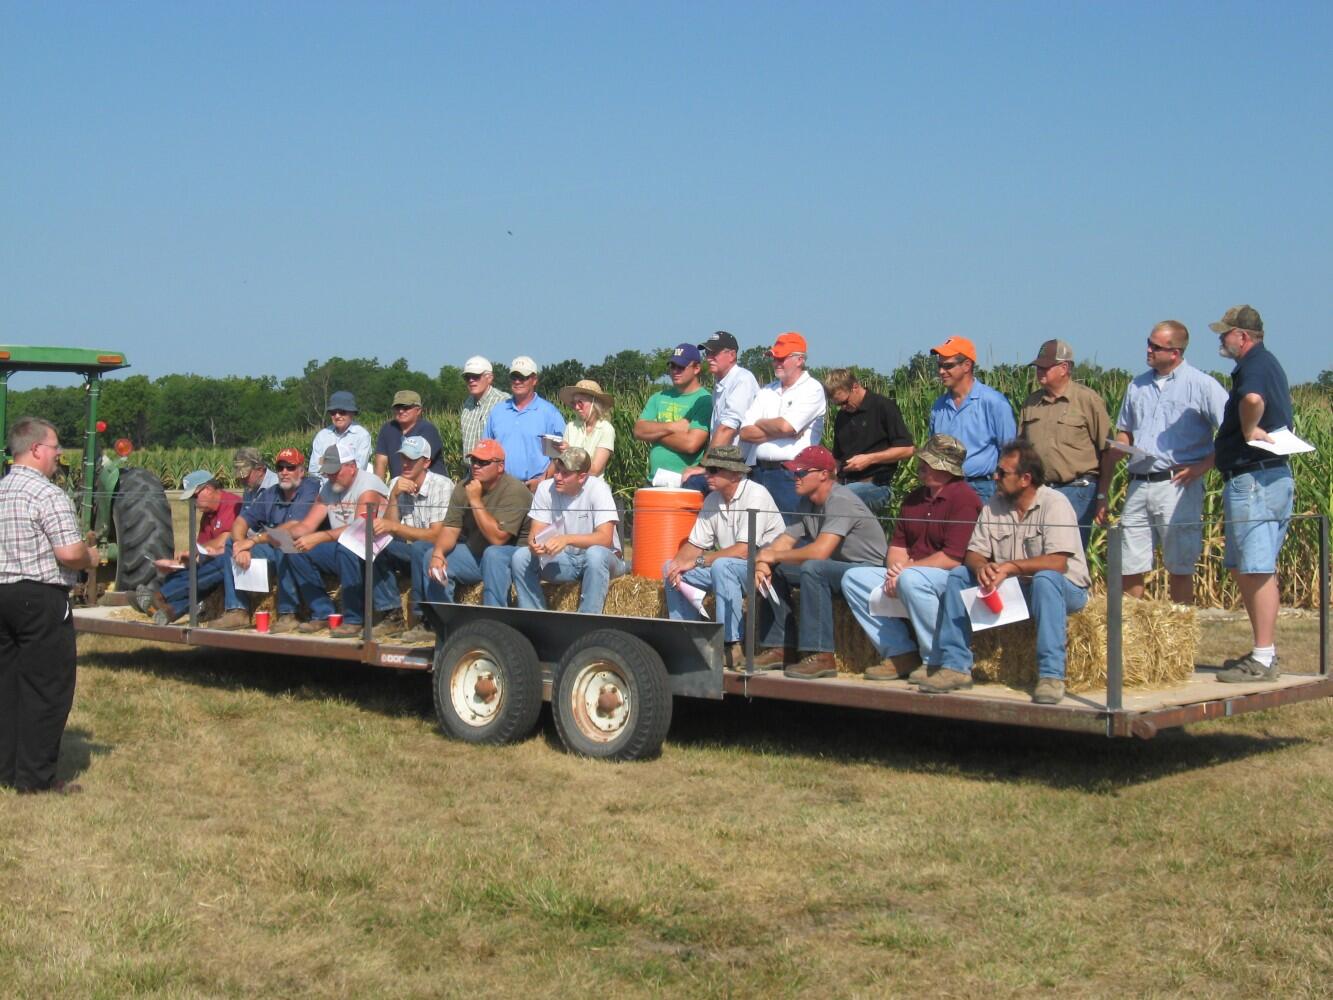 Head to Orr Agricultural Center July 20 for an agronomy-focused field day